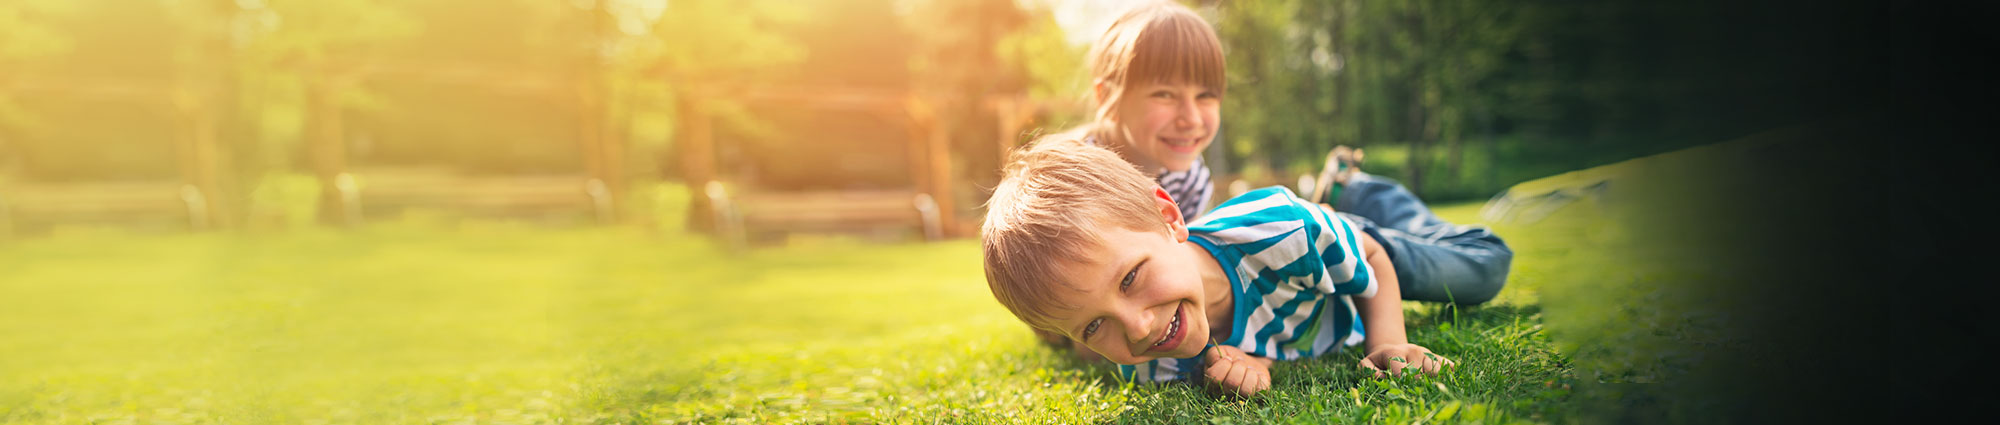 Two children laying in the grass smiling for a picture.